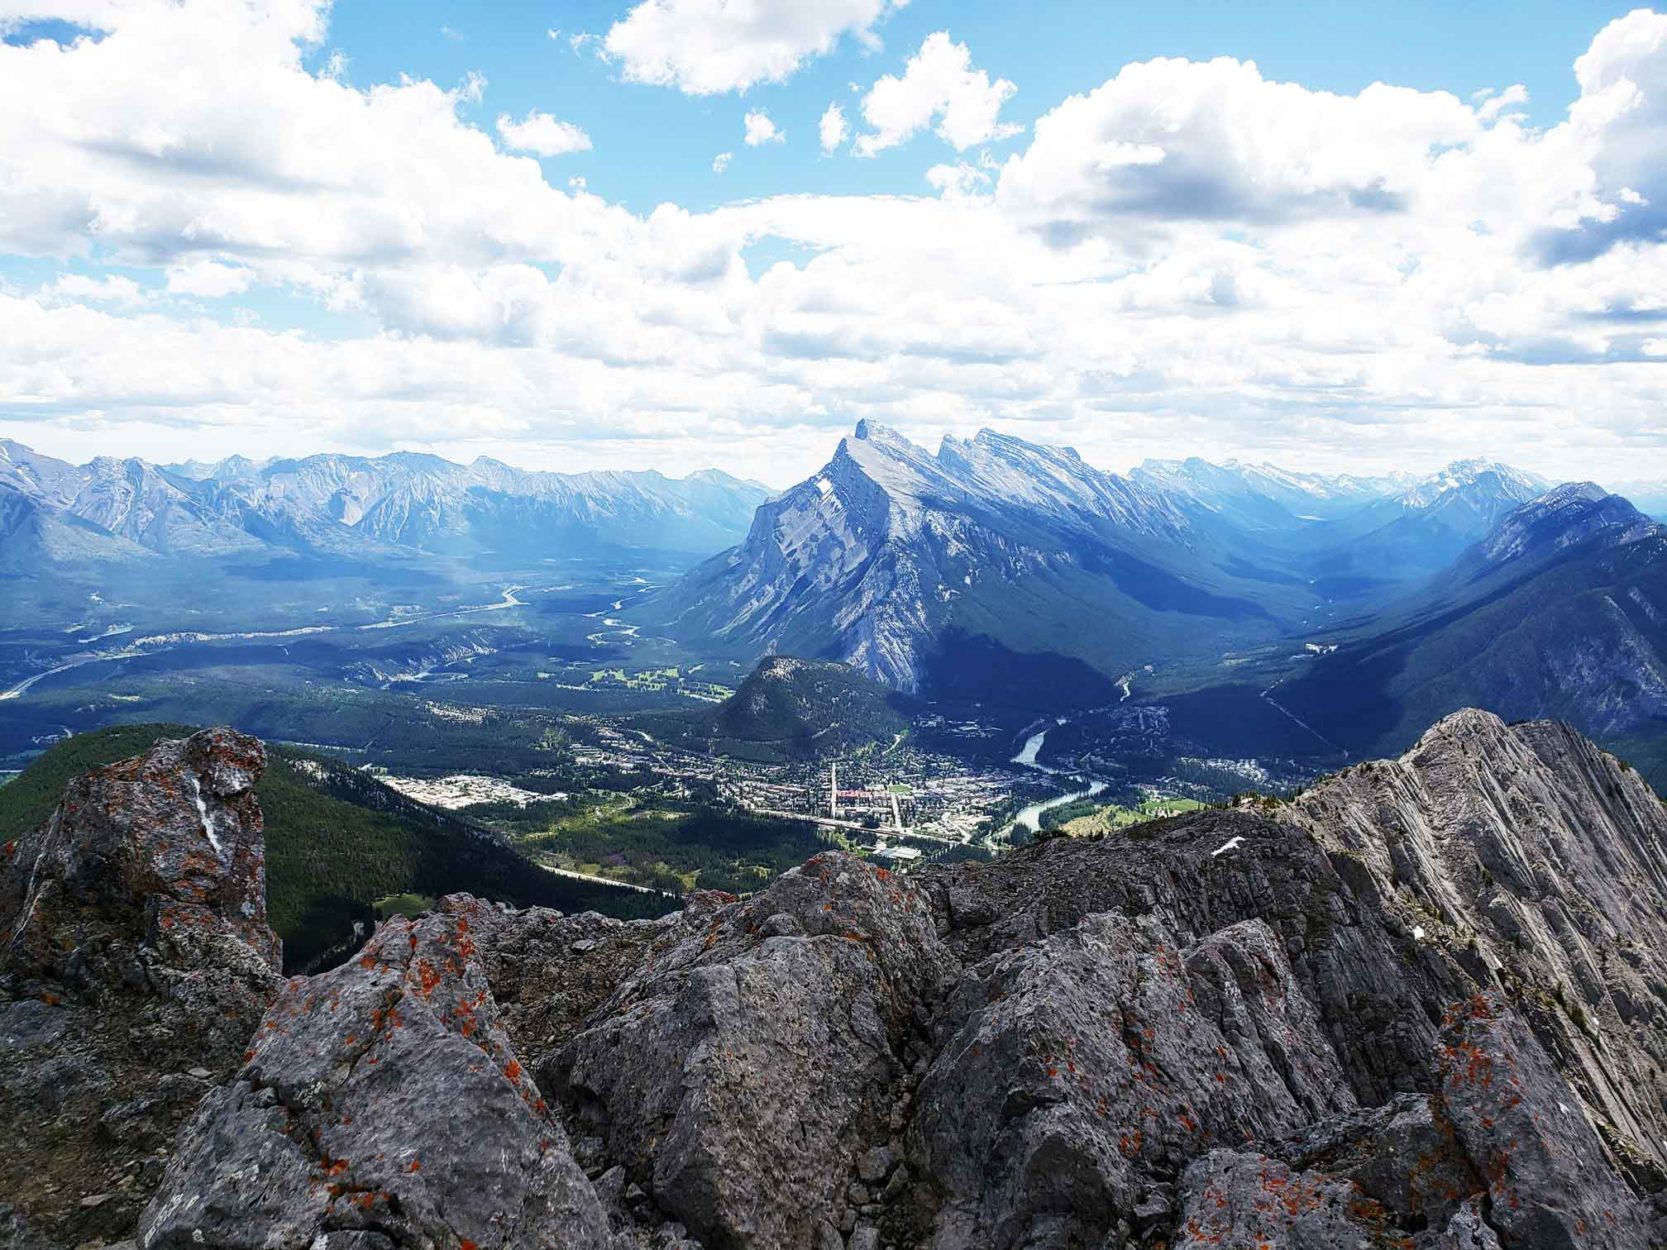 Reaching New Heights with Norquay’s Via Ferrata on Where Rockies